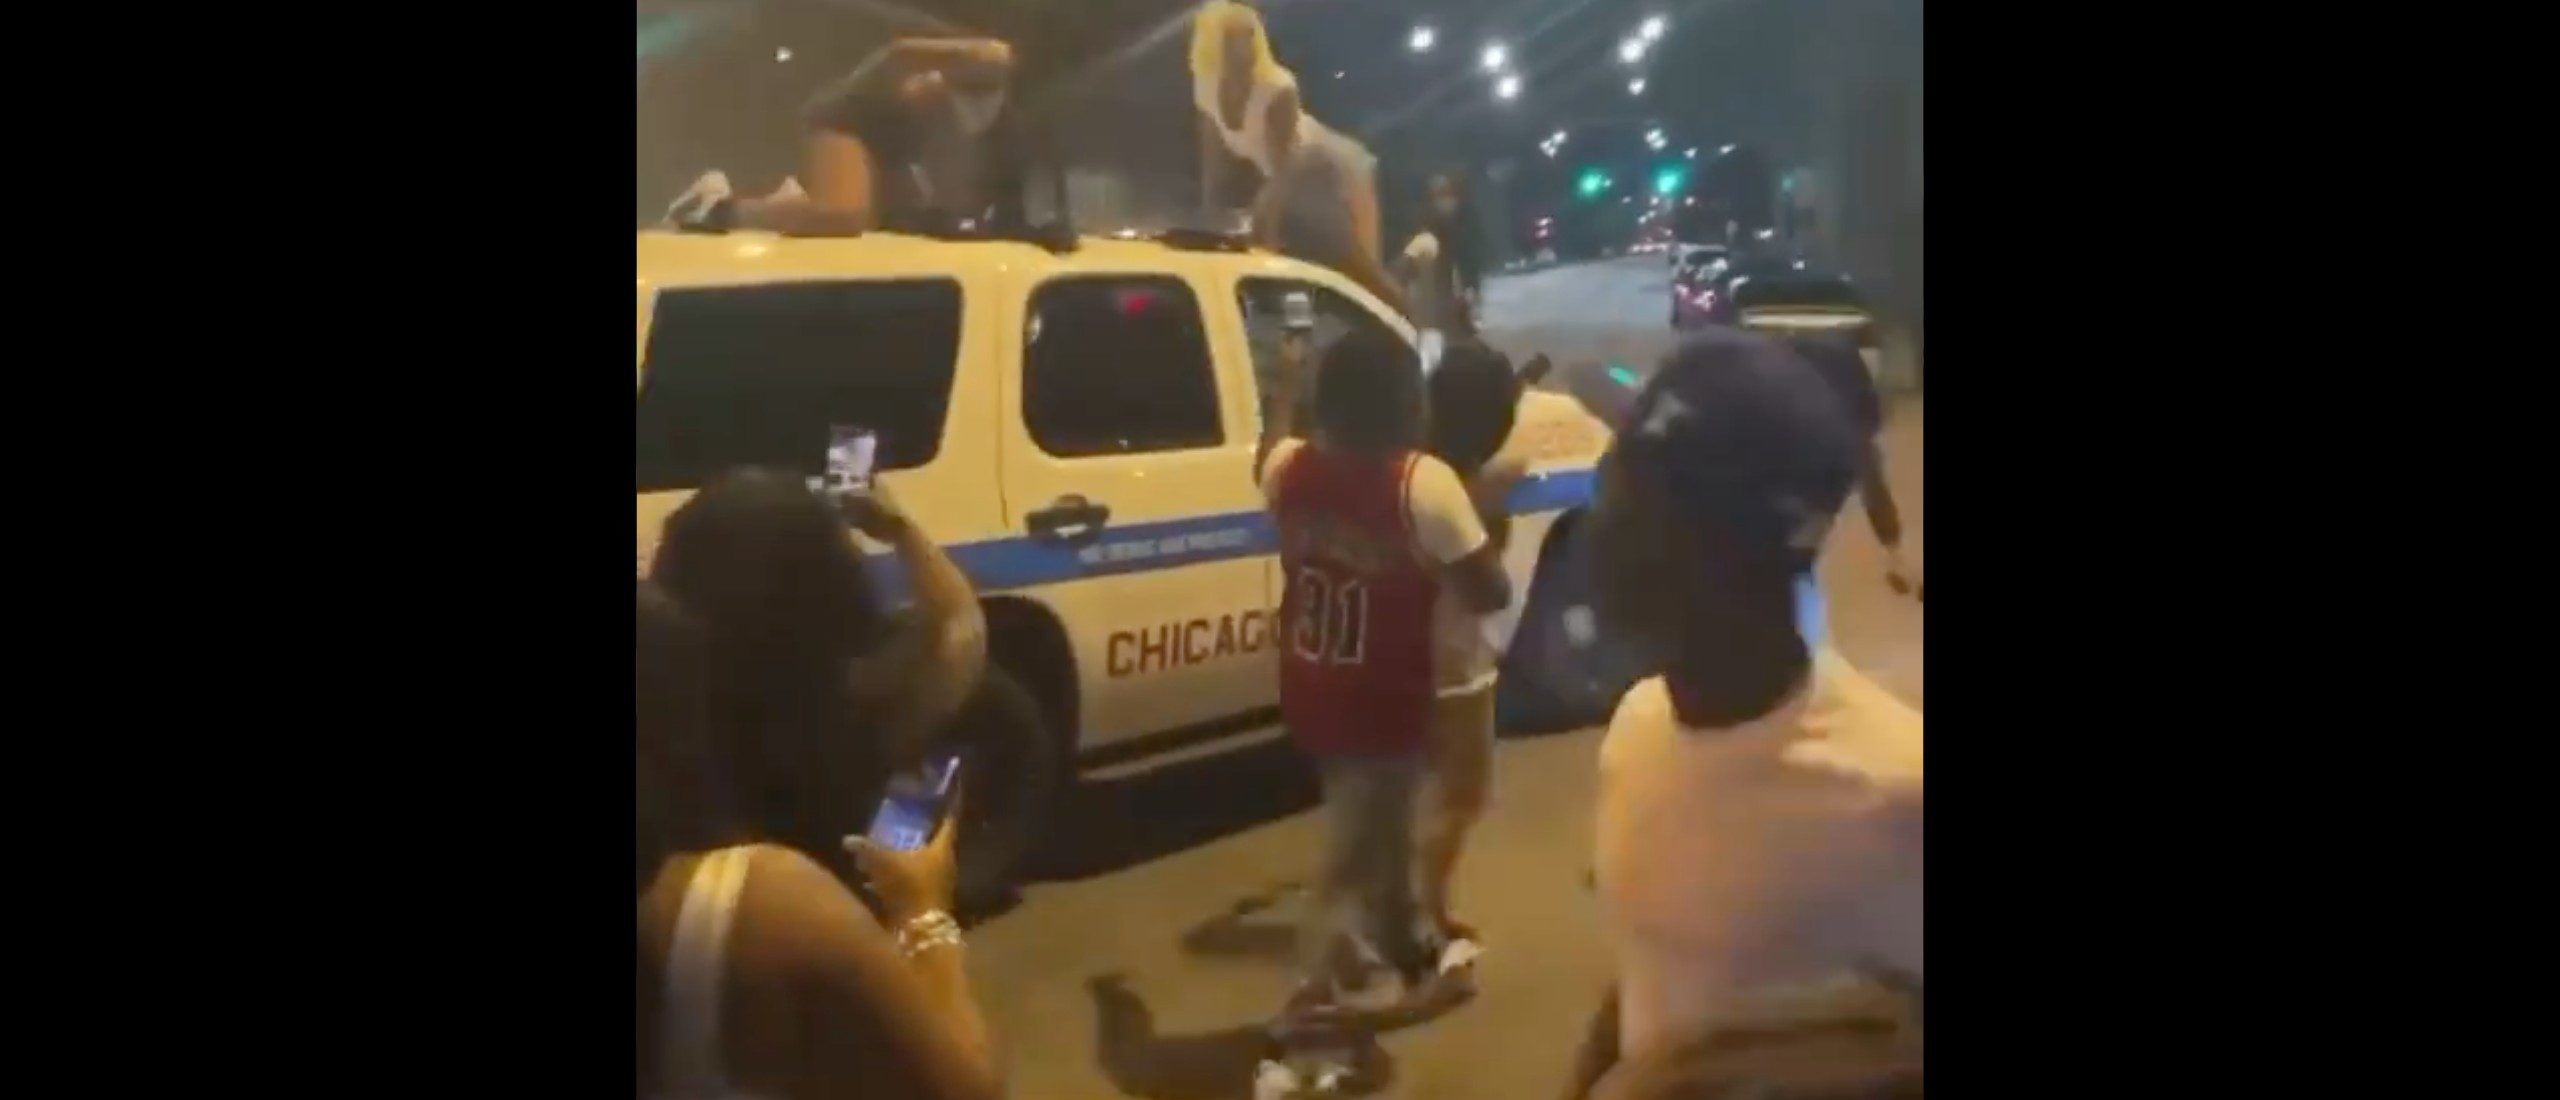 Scandalous Video Shows Three Women Twerking On Top Of Moving Police Car The Daily Caller